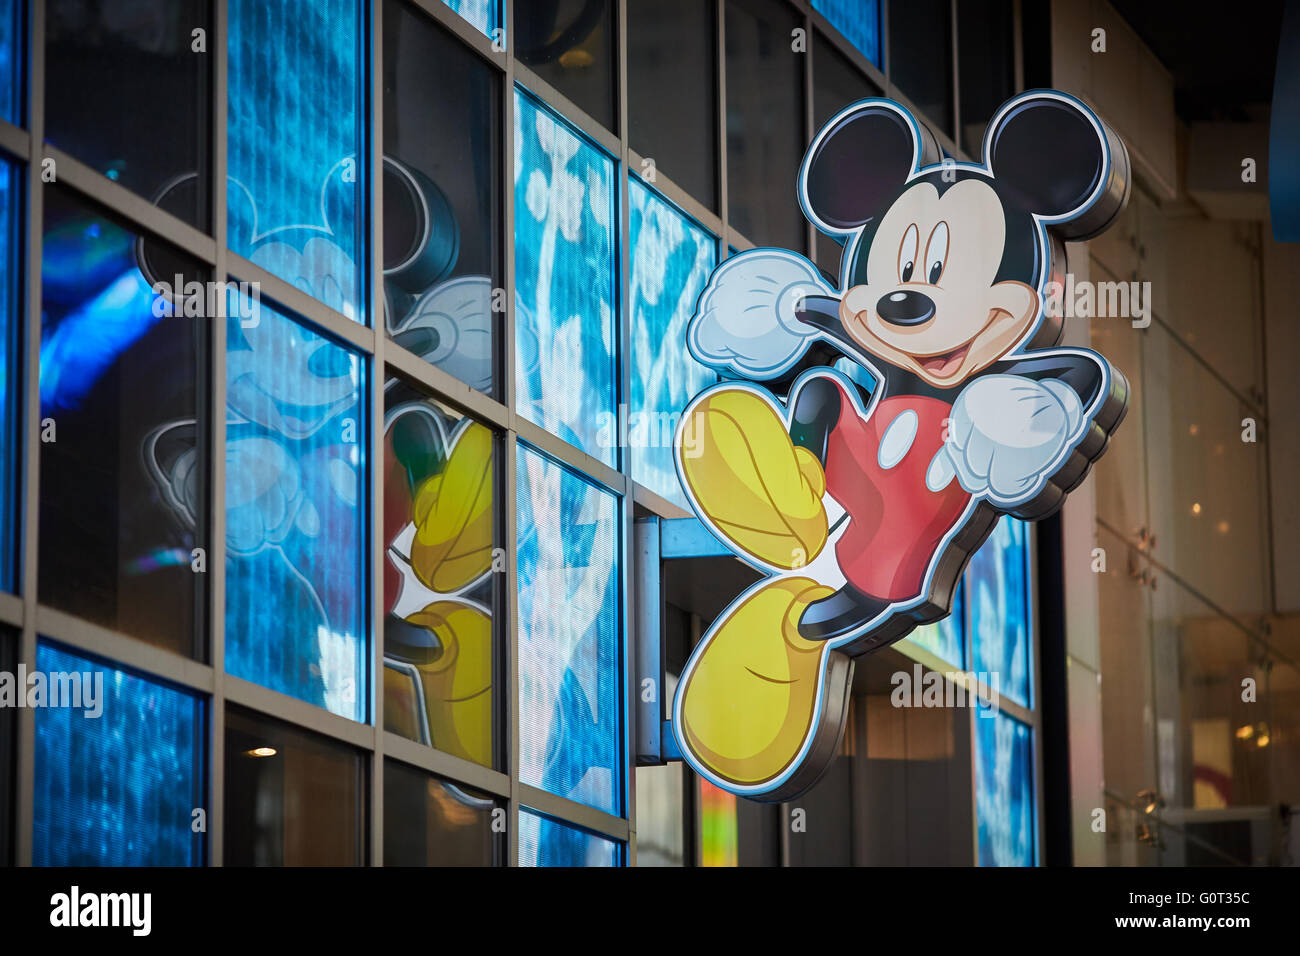 New York times Square   Disney store exterior Mickey Mouse logo sign Stock Photo